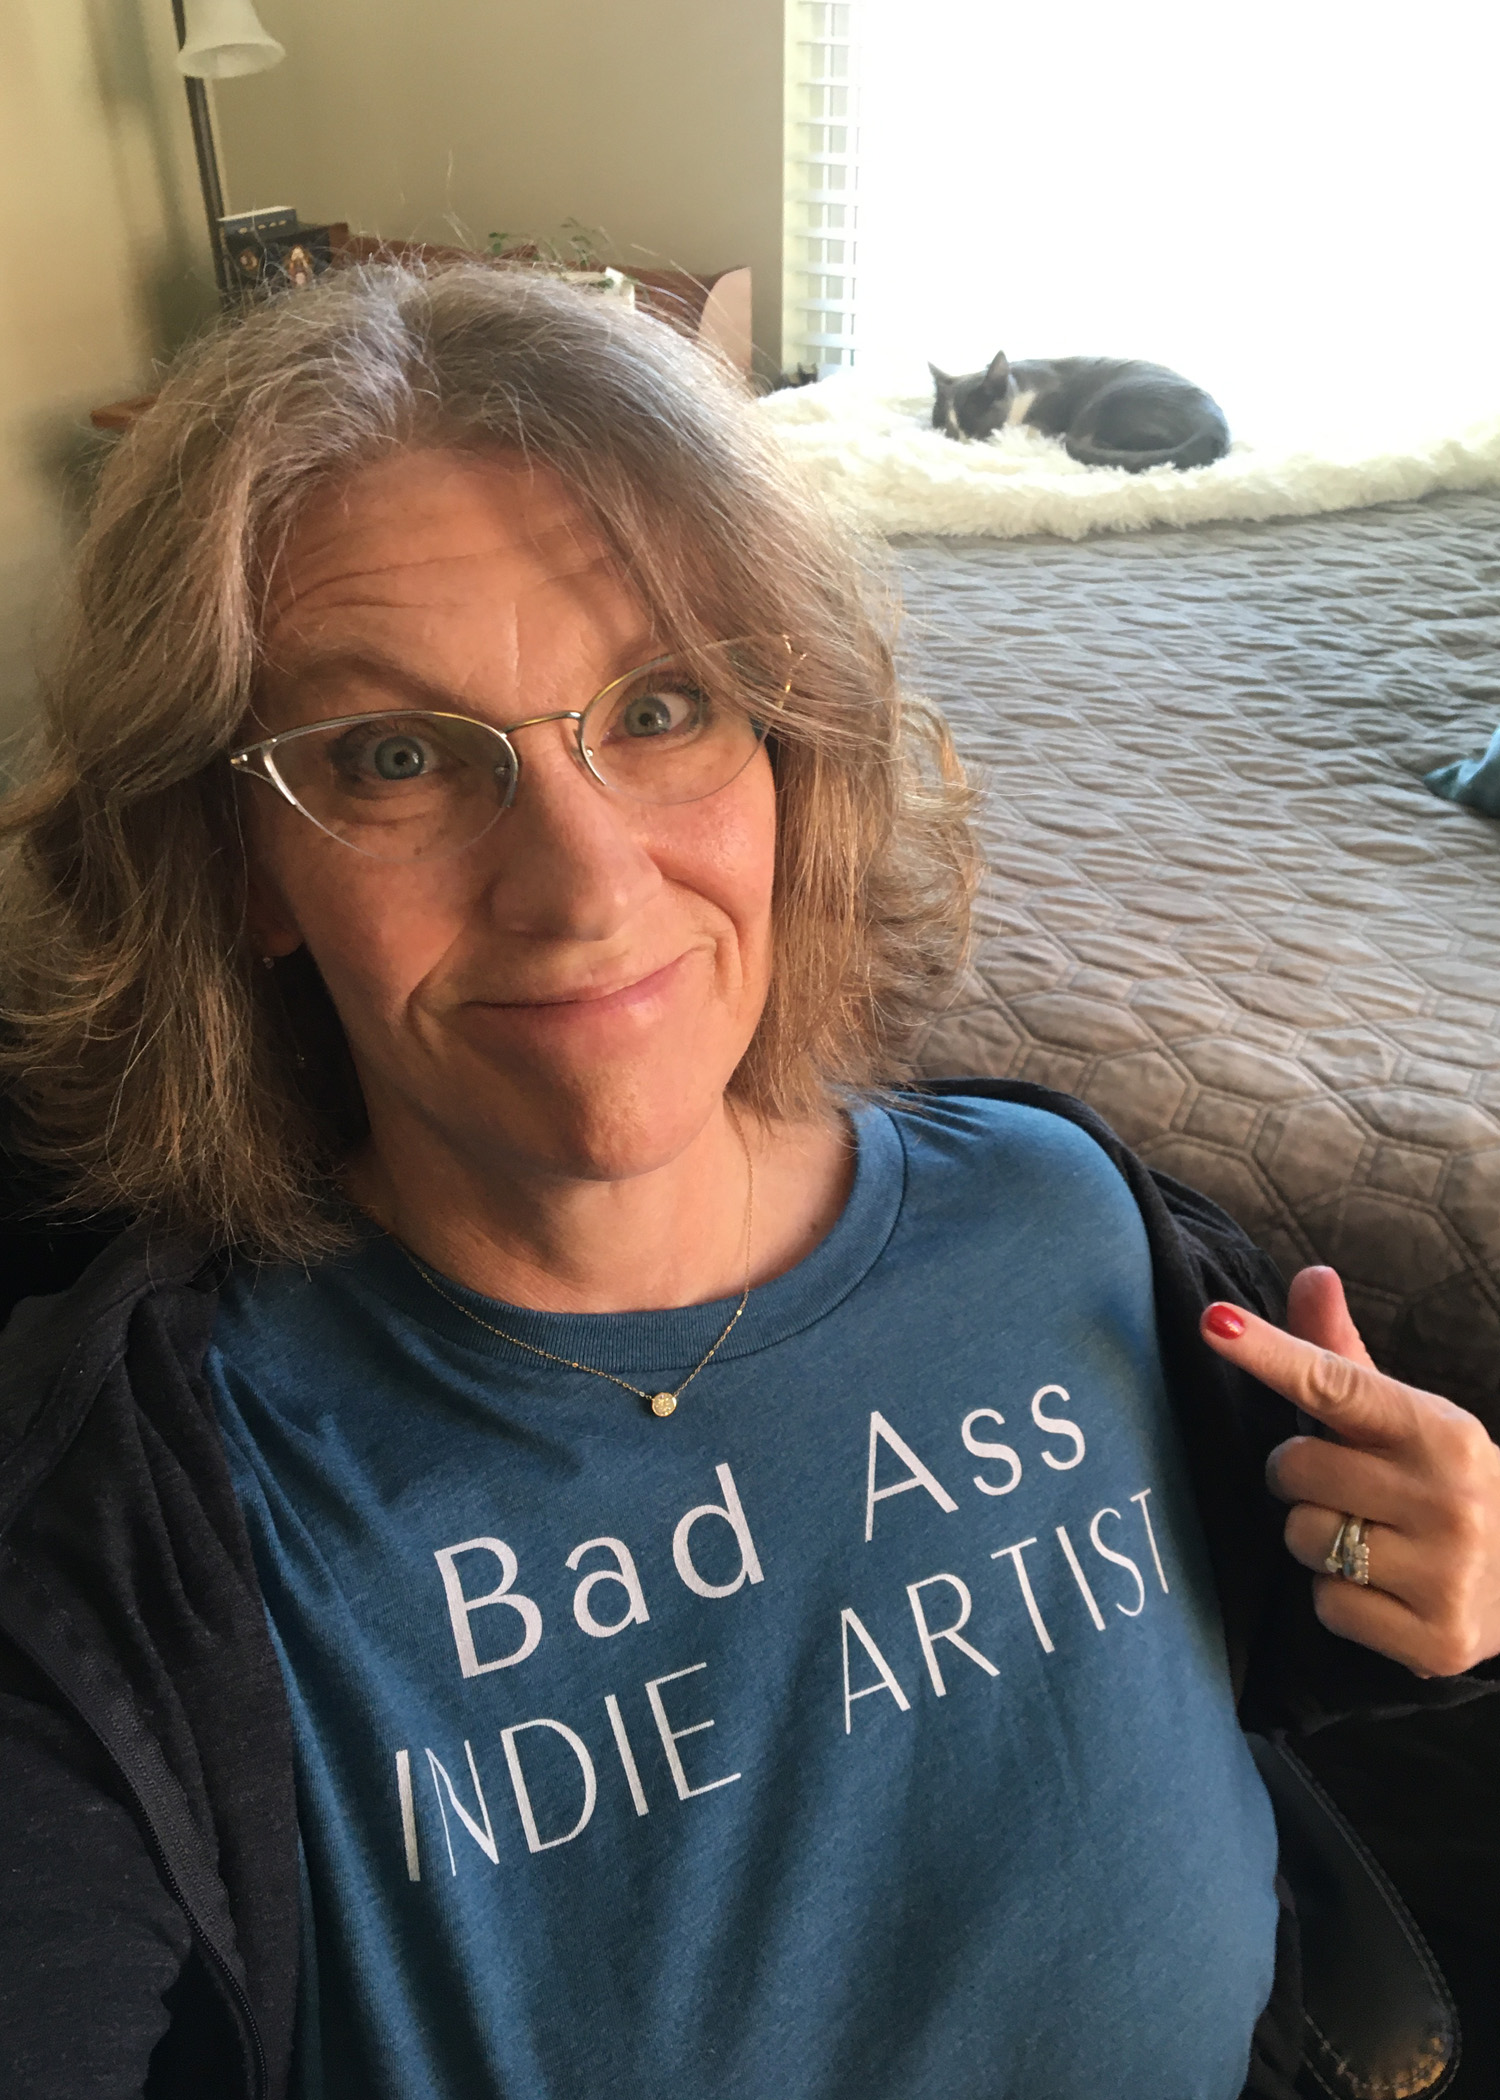 Pointing to text on t-shirt 'Bad Ass Indie Artist".